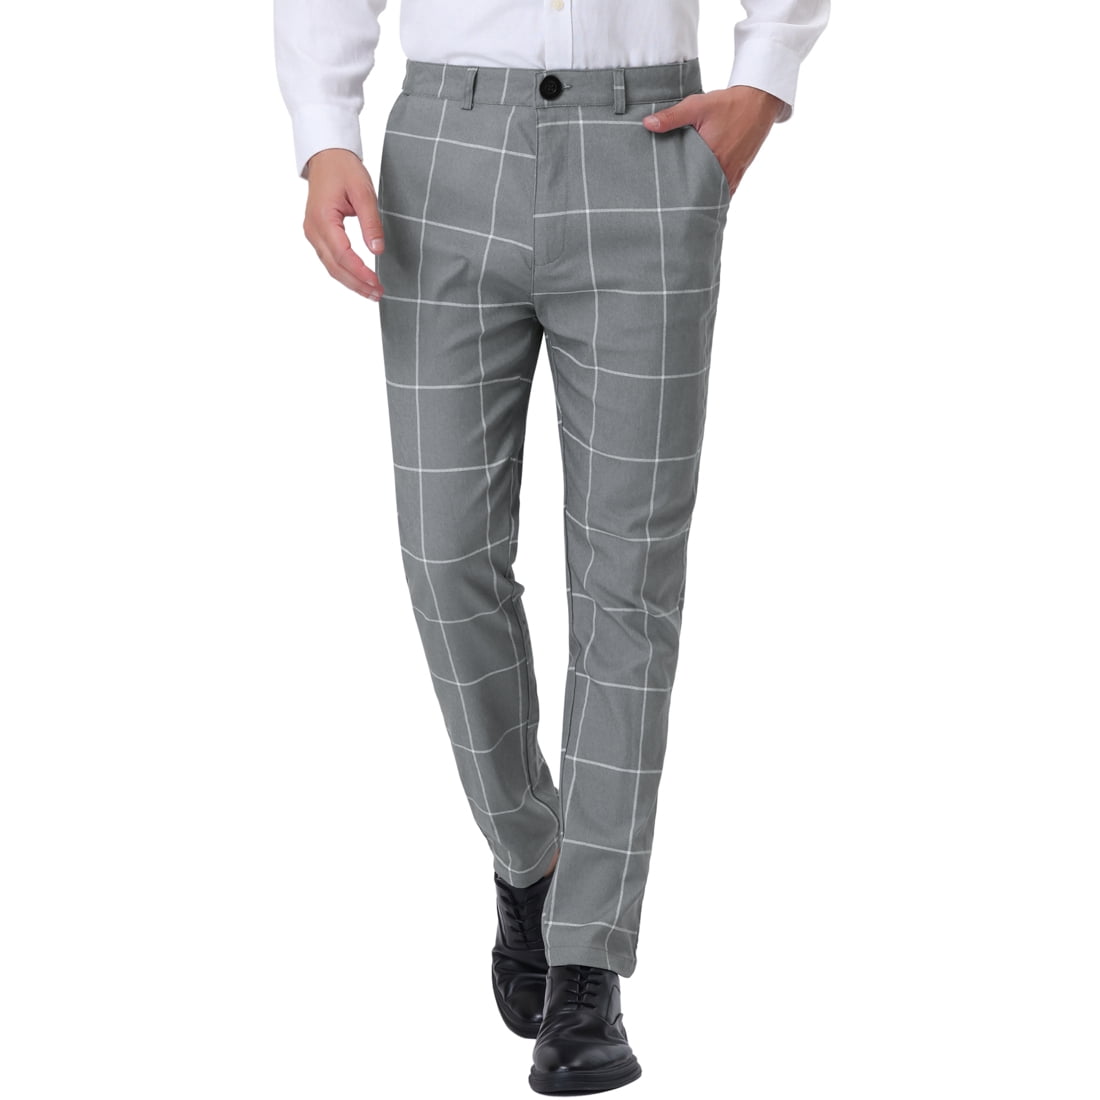 Men's Casual Business Formal Slim Fit Check Trousers Plaid Skinny  Chino Pants | eBay